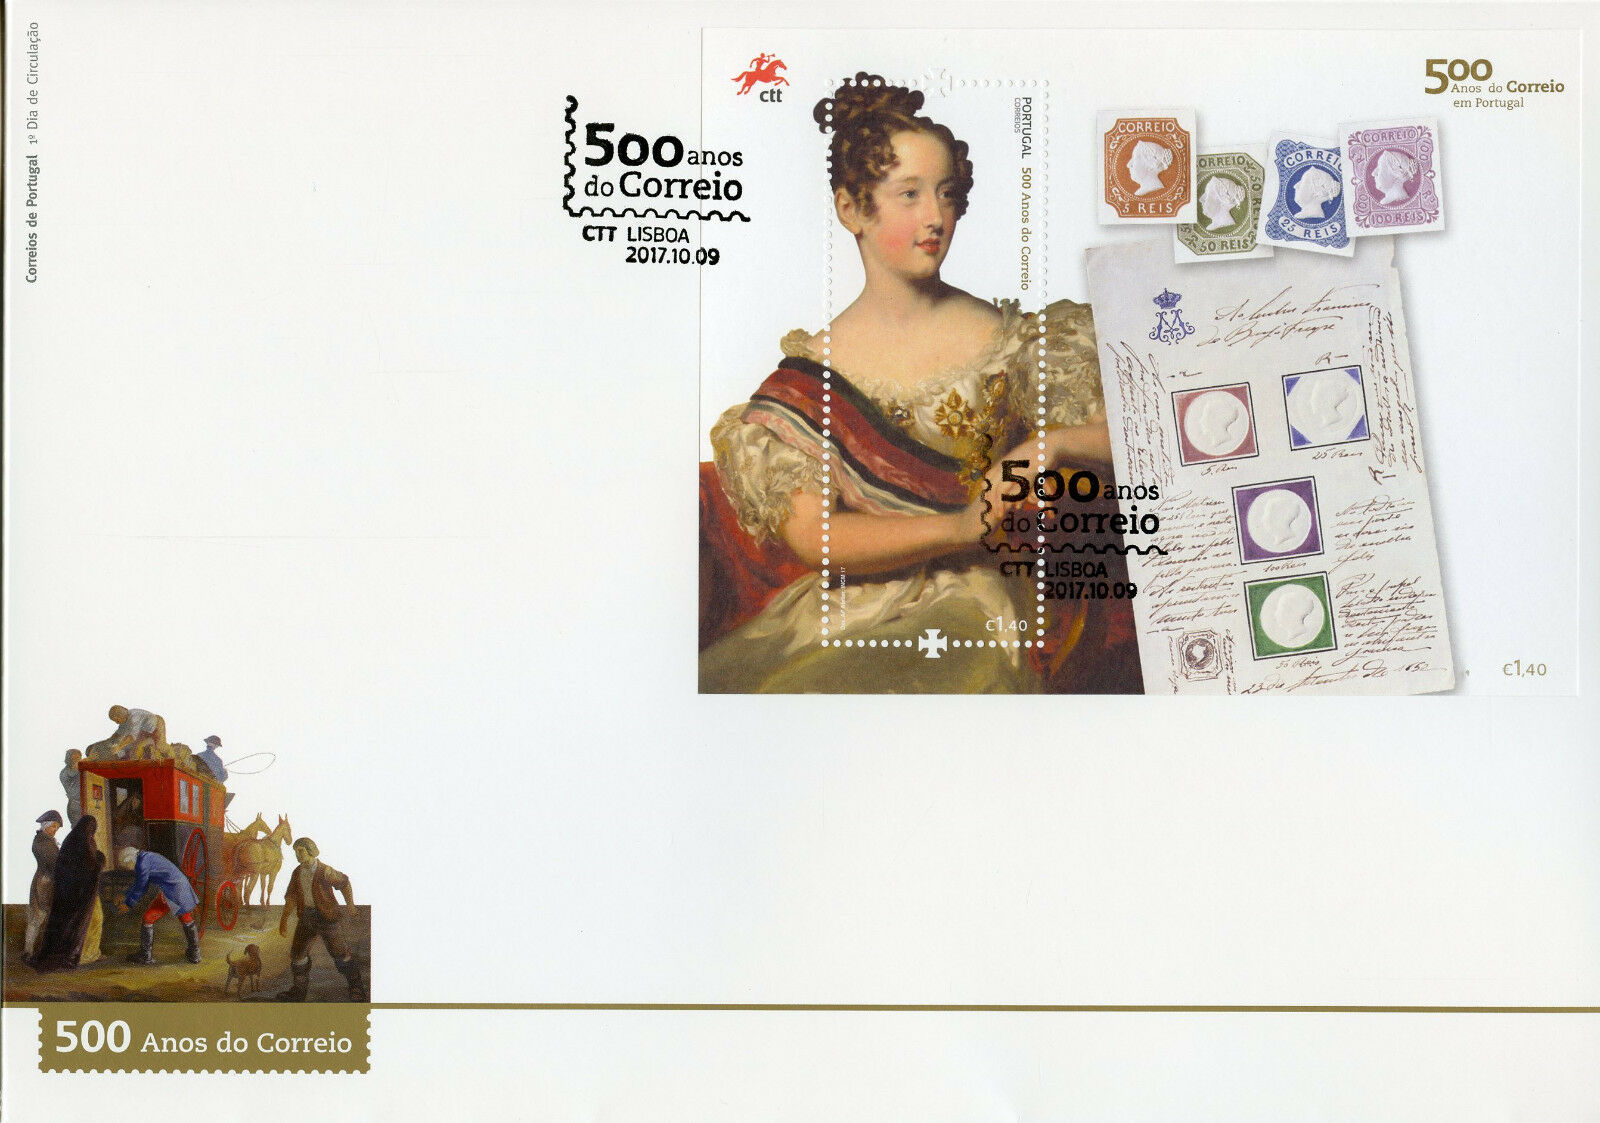 Portugal 2017 FDC Correio Postal Services 500 Yrs 1v M/S Cover Stamps on Stamps